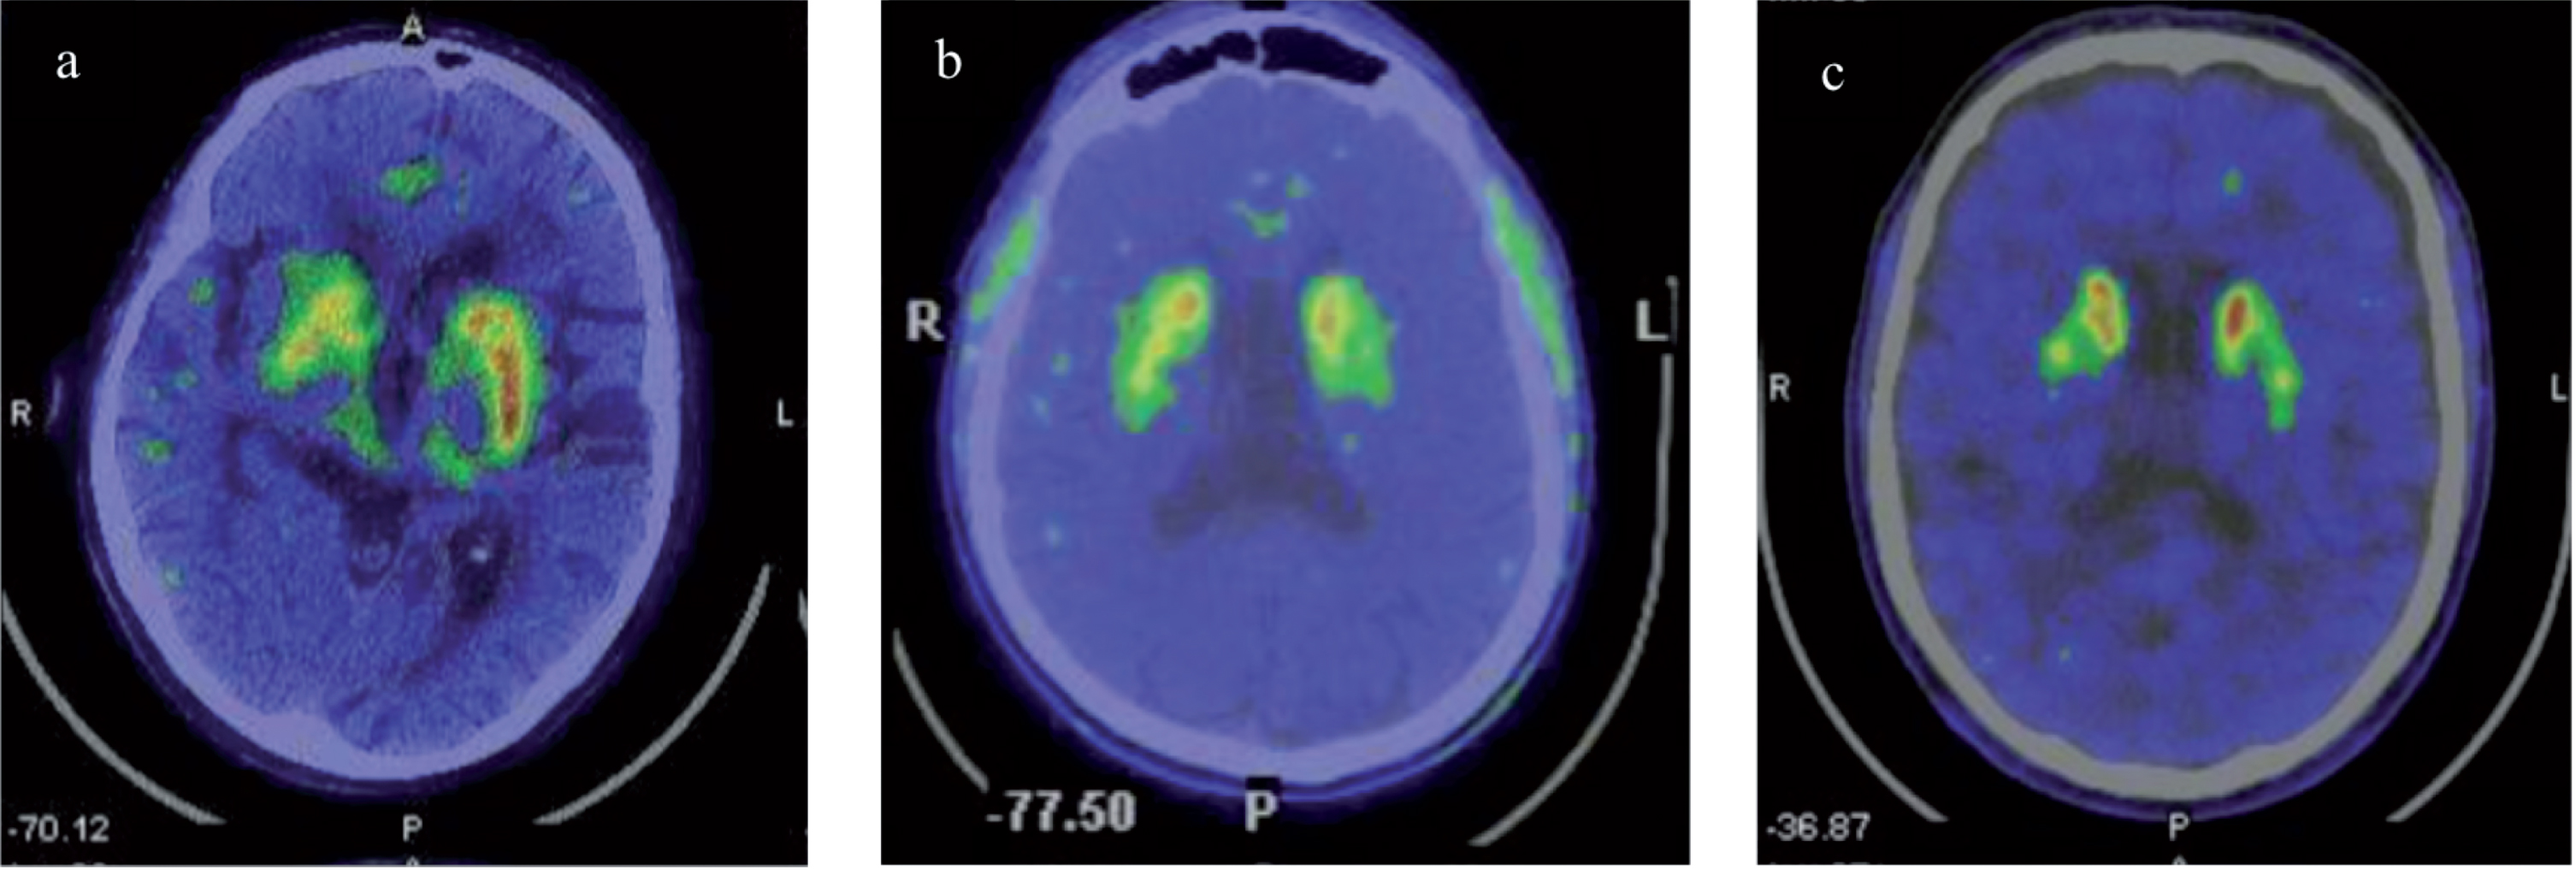 18F-DOPA PET scan performed in patients with Fabry Disease and Parkinson’s Disease revealed: a) reduced right striatal dopaminergic presynaptic deficit in patient P1; b) reduced left striatum dopaminergic presynaptic deficit in patient P2; c) and reduced right nigro-striatal dopaminergic presynaptic deficit in patient P3.